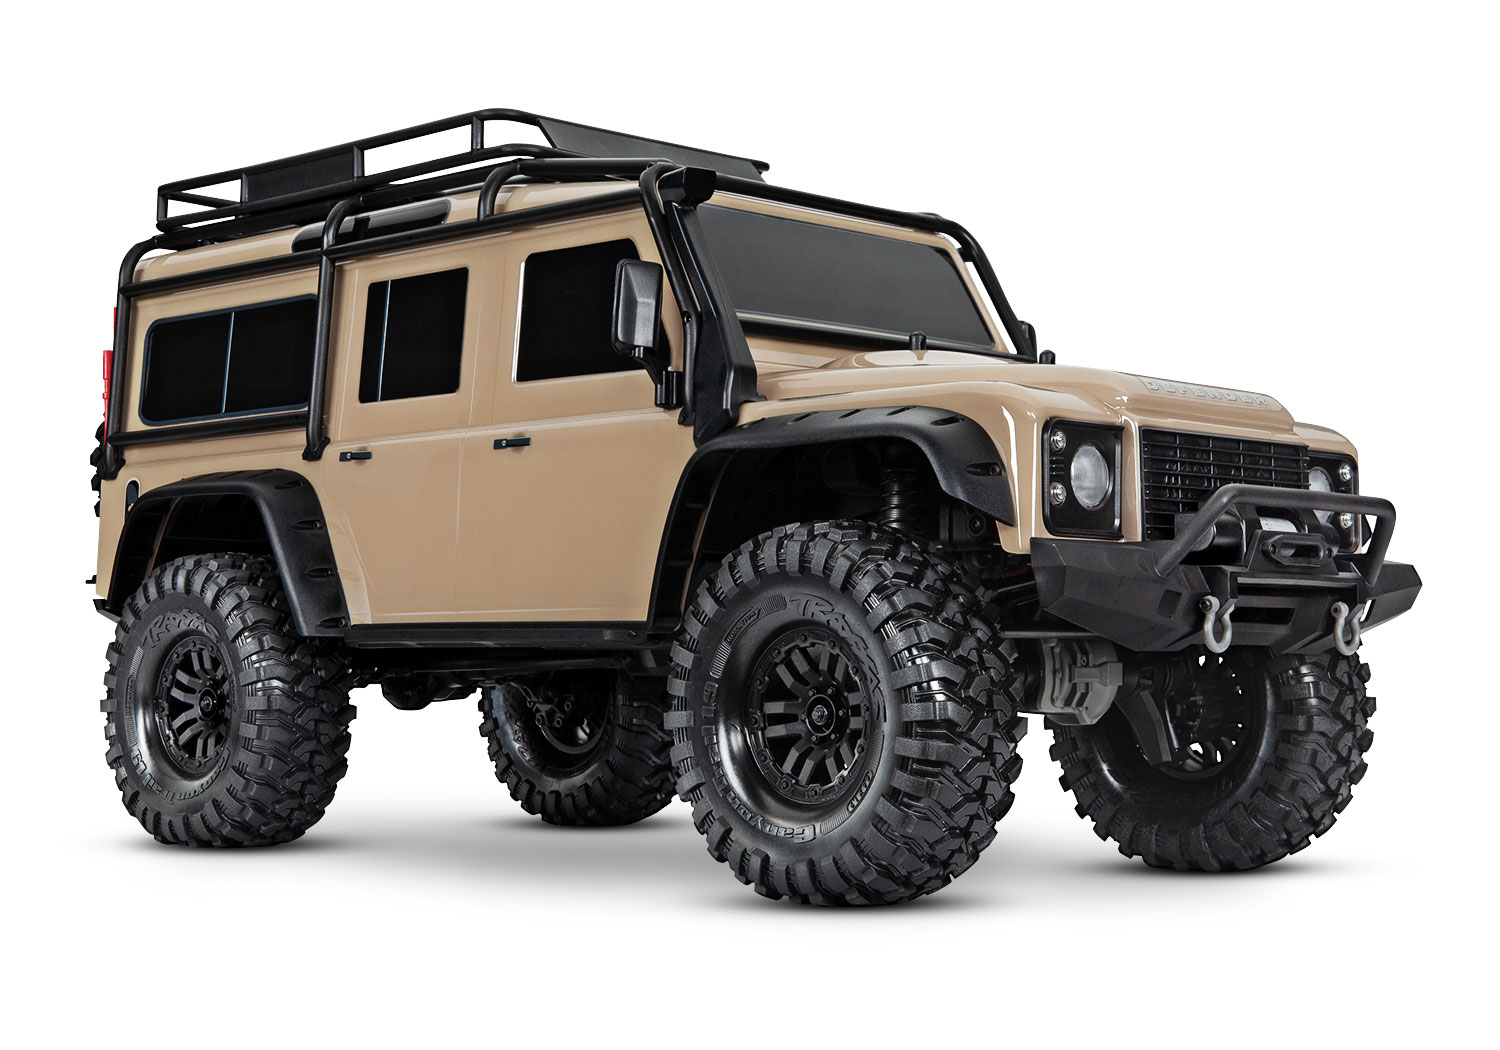 TRX-4 Scale & Trial Crawler Land Rover Sand RTR